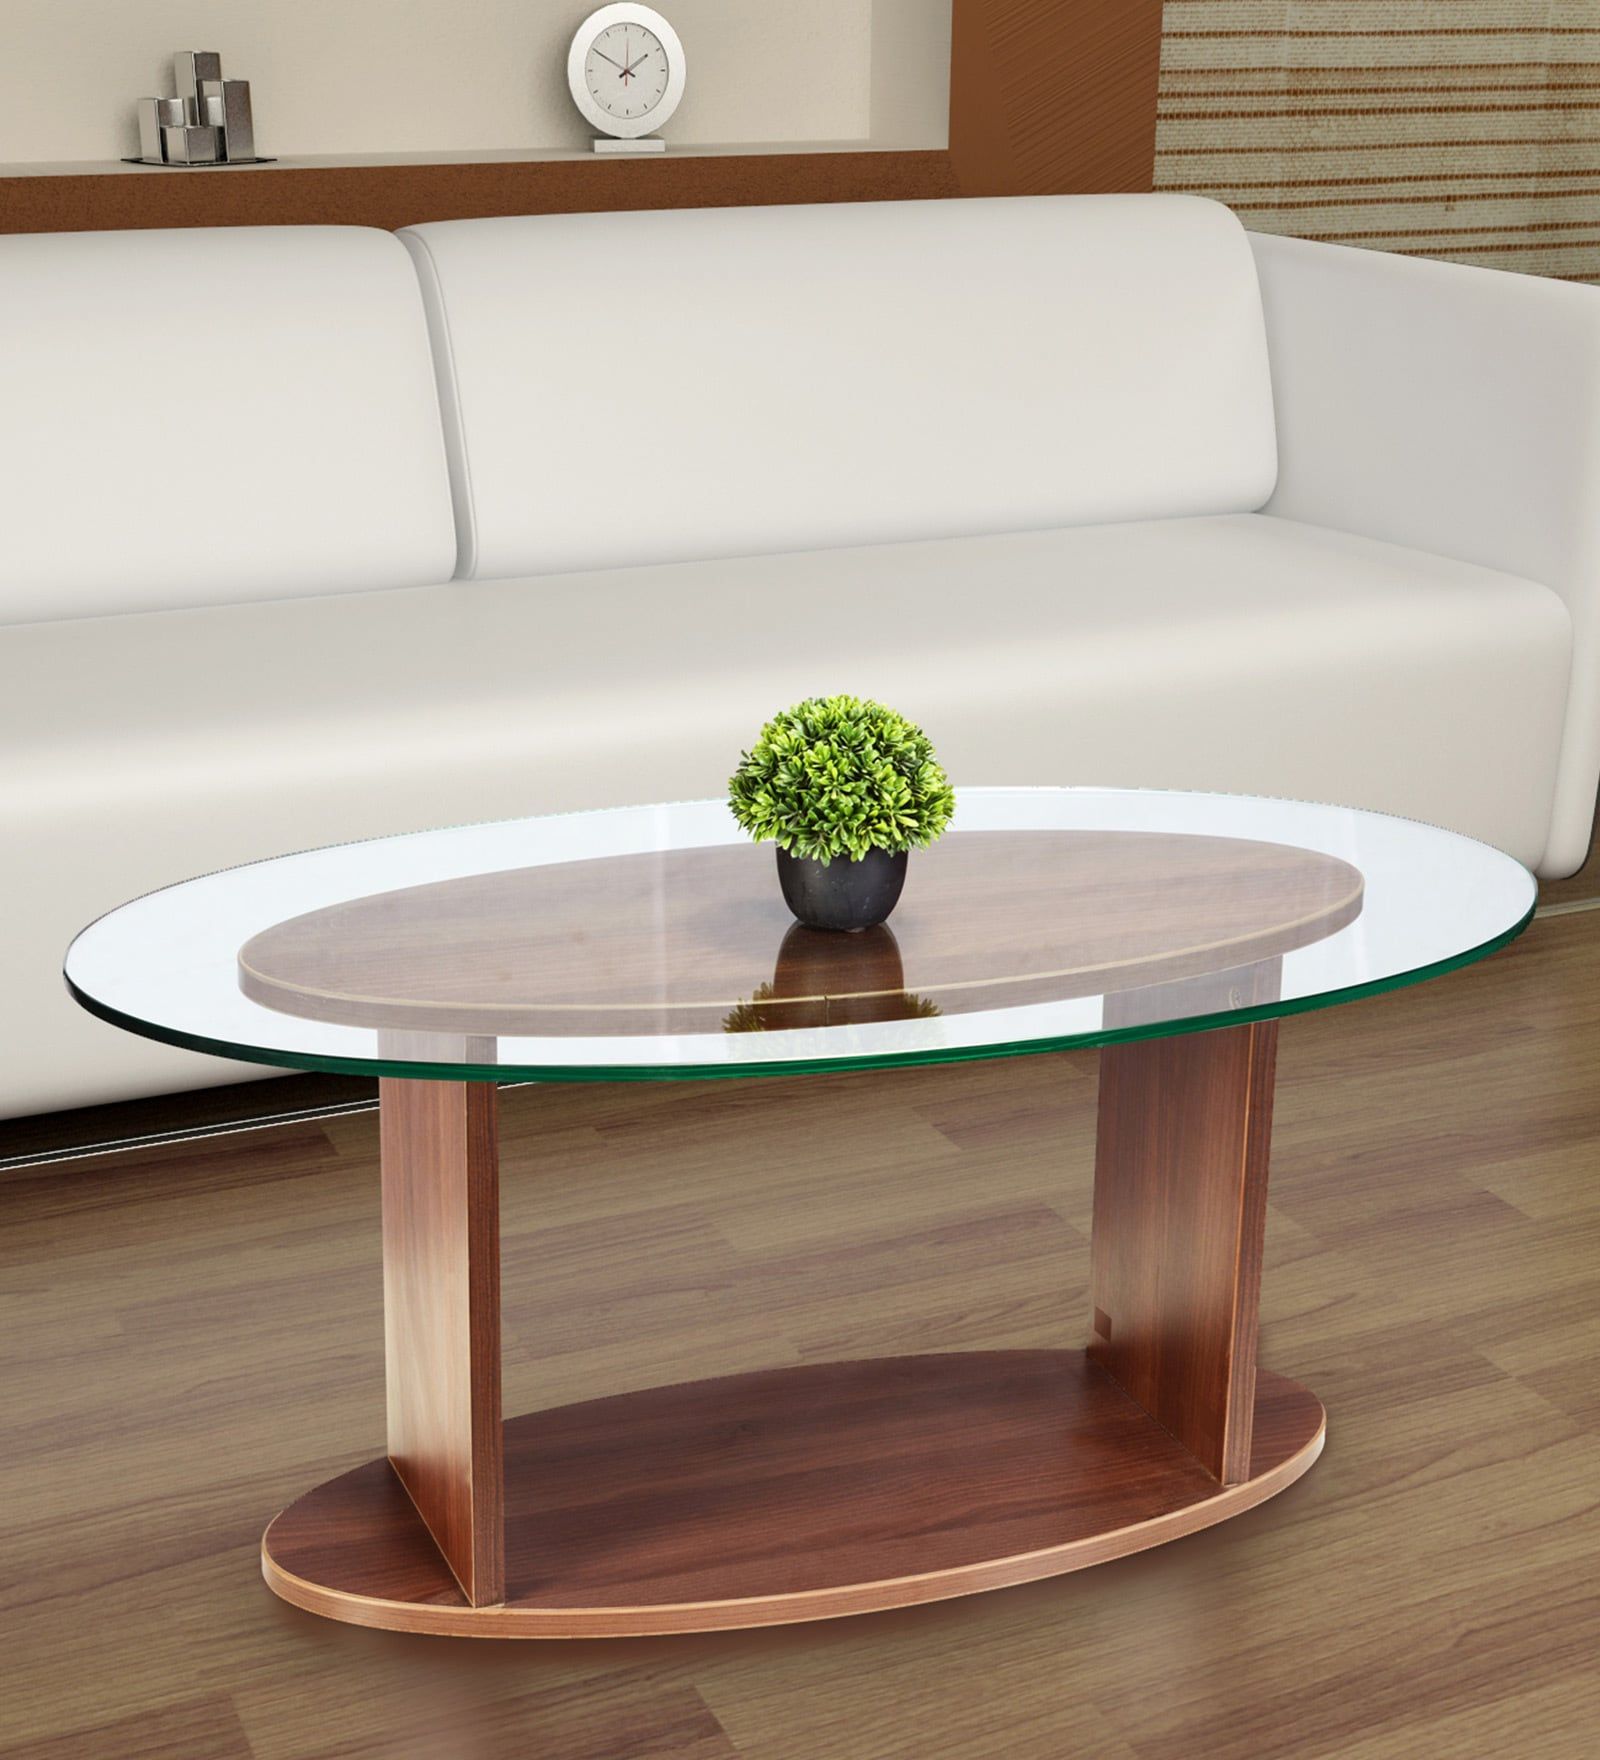 Buy Oval Shaped Glass Top Coffee Table In Walnut Finishaddy Design Regarding Oval Glass Coffee Tables (Gallery 1 of 20)